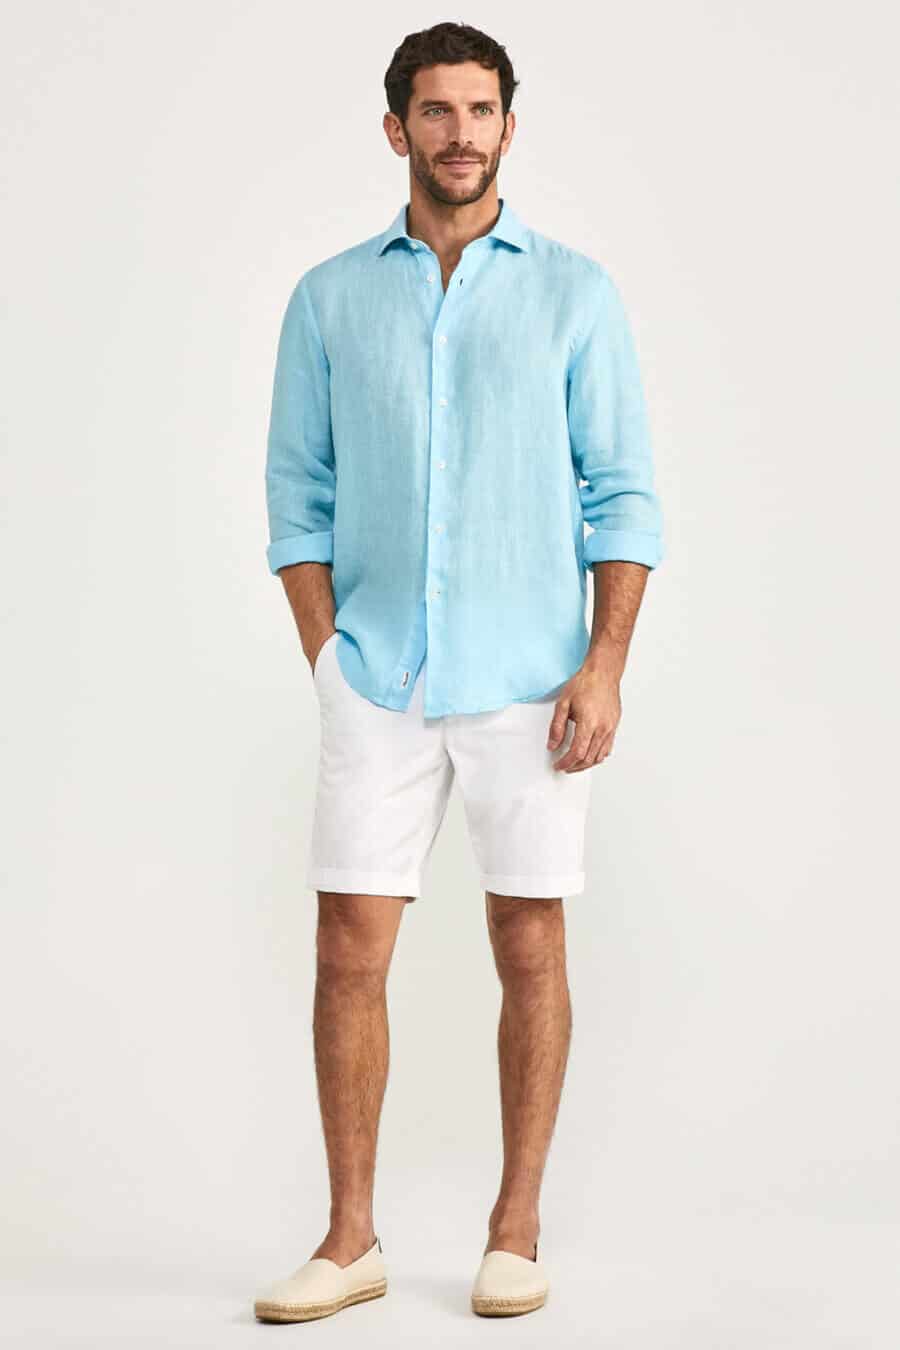 Men's white linen shorts with a bright blue shirt and espadrilles outfit